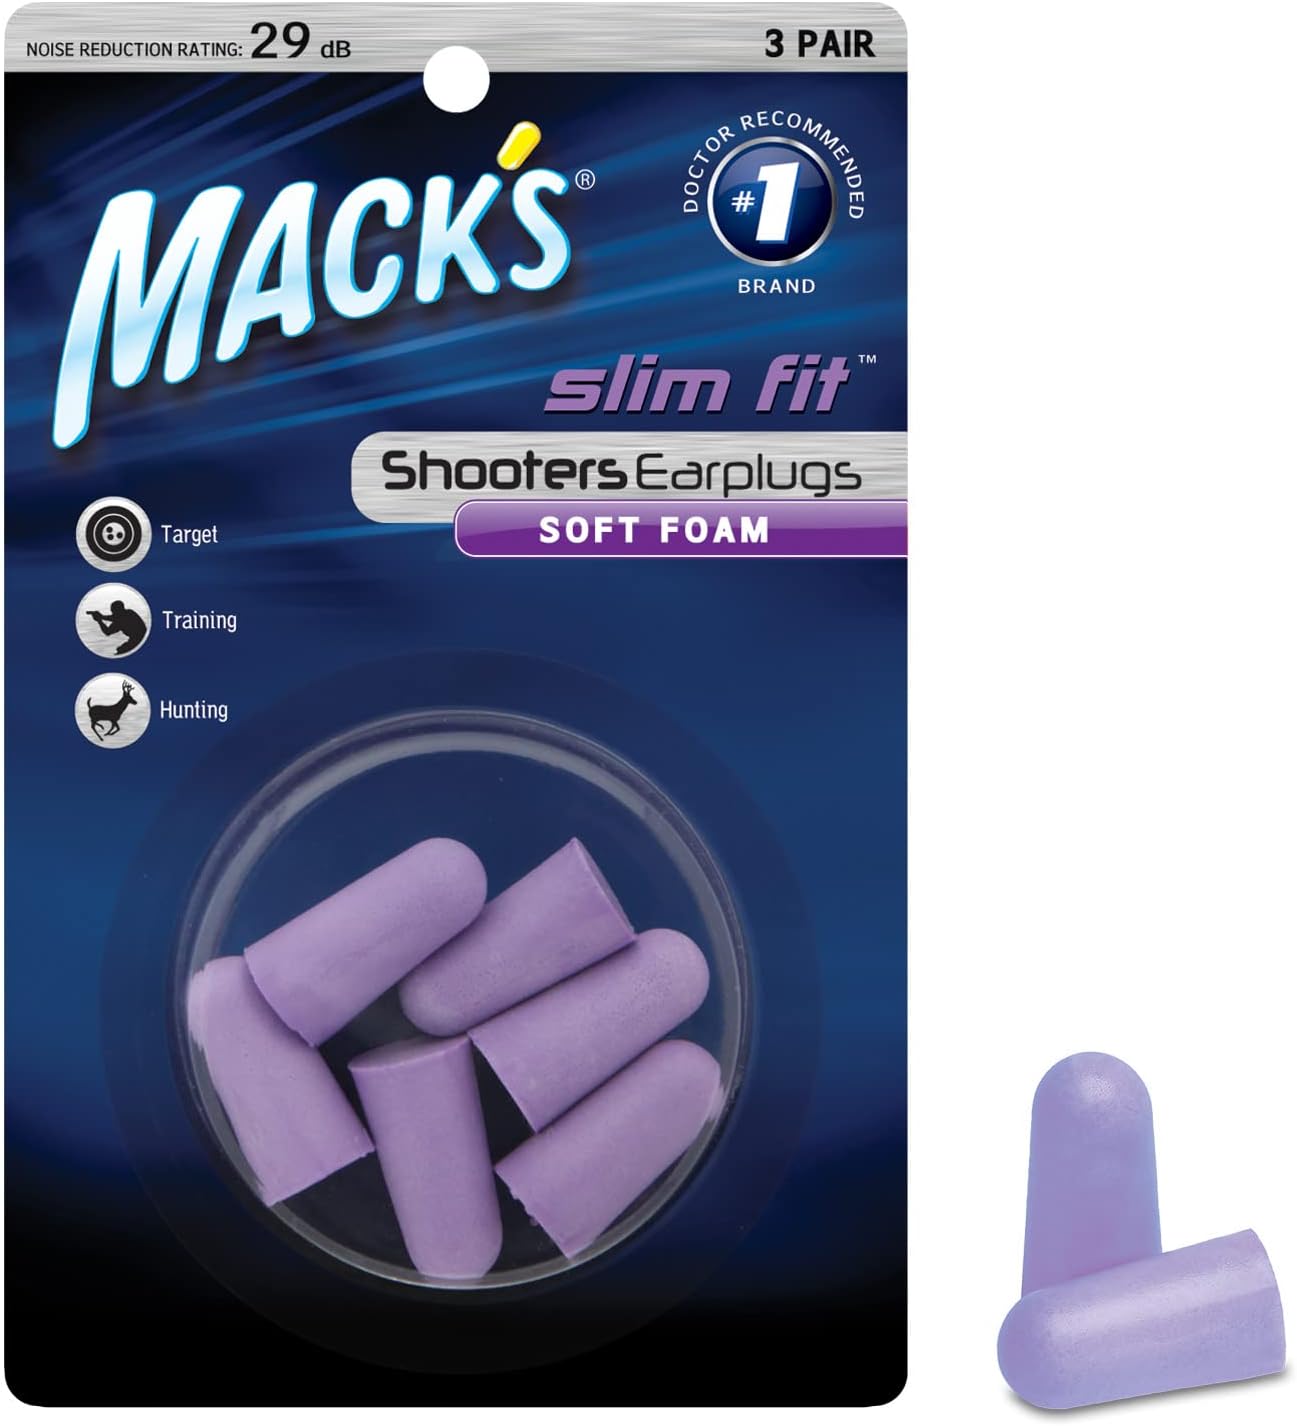 Mack?s Slim Fit Soft Foam Shooting Ear Plugs, 3 Pair - Small Earplugs for Hunting, Tactical, Target, Skeet and Trap Shooting | Made in USA